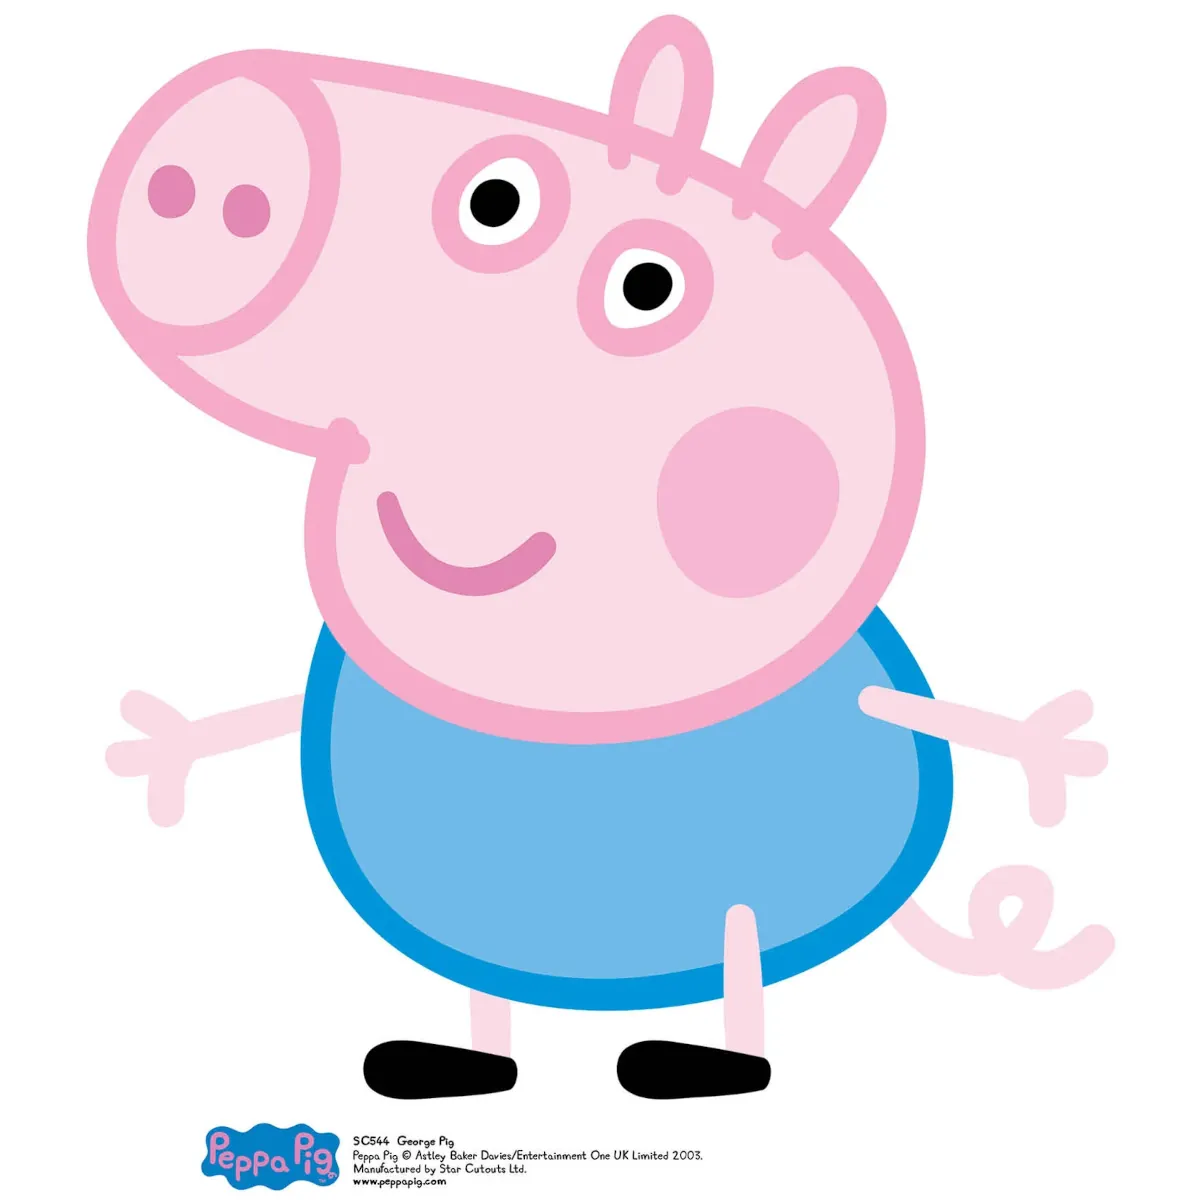 SC544 George Pig (Peppa Pig) Official Mini Cardboard Cutout Standee Front